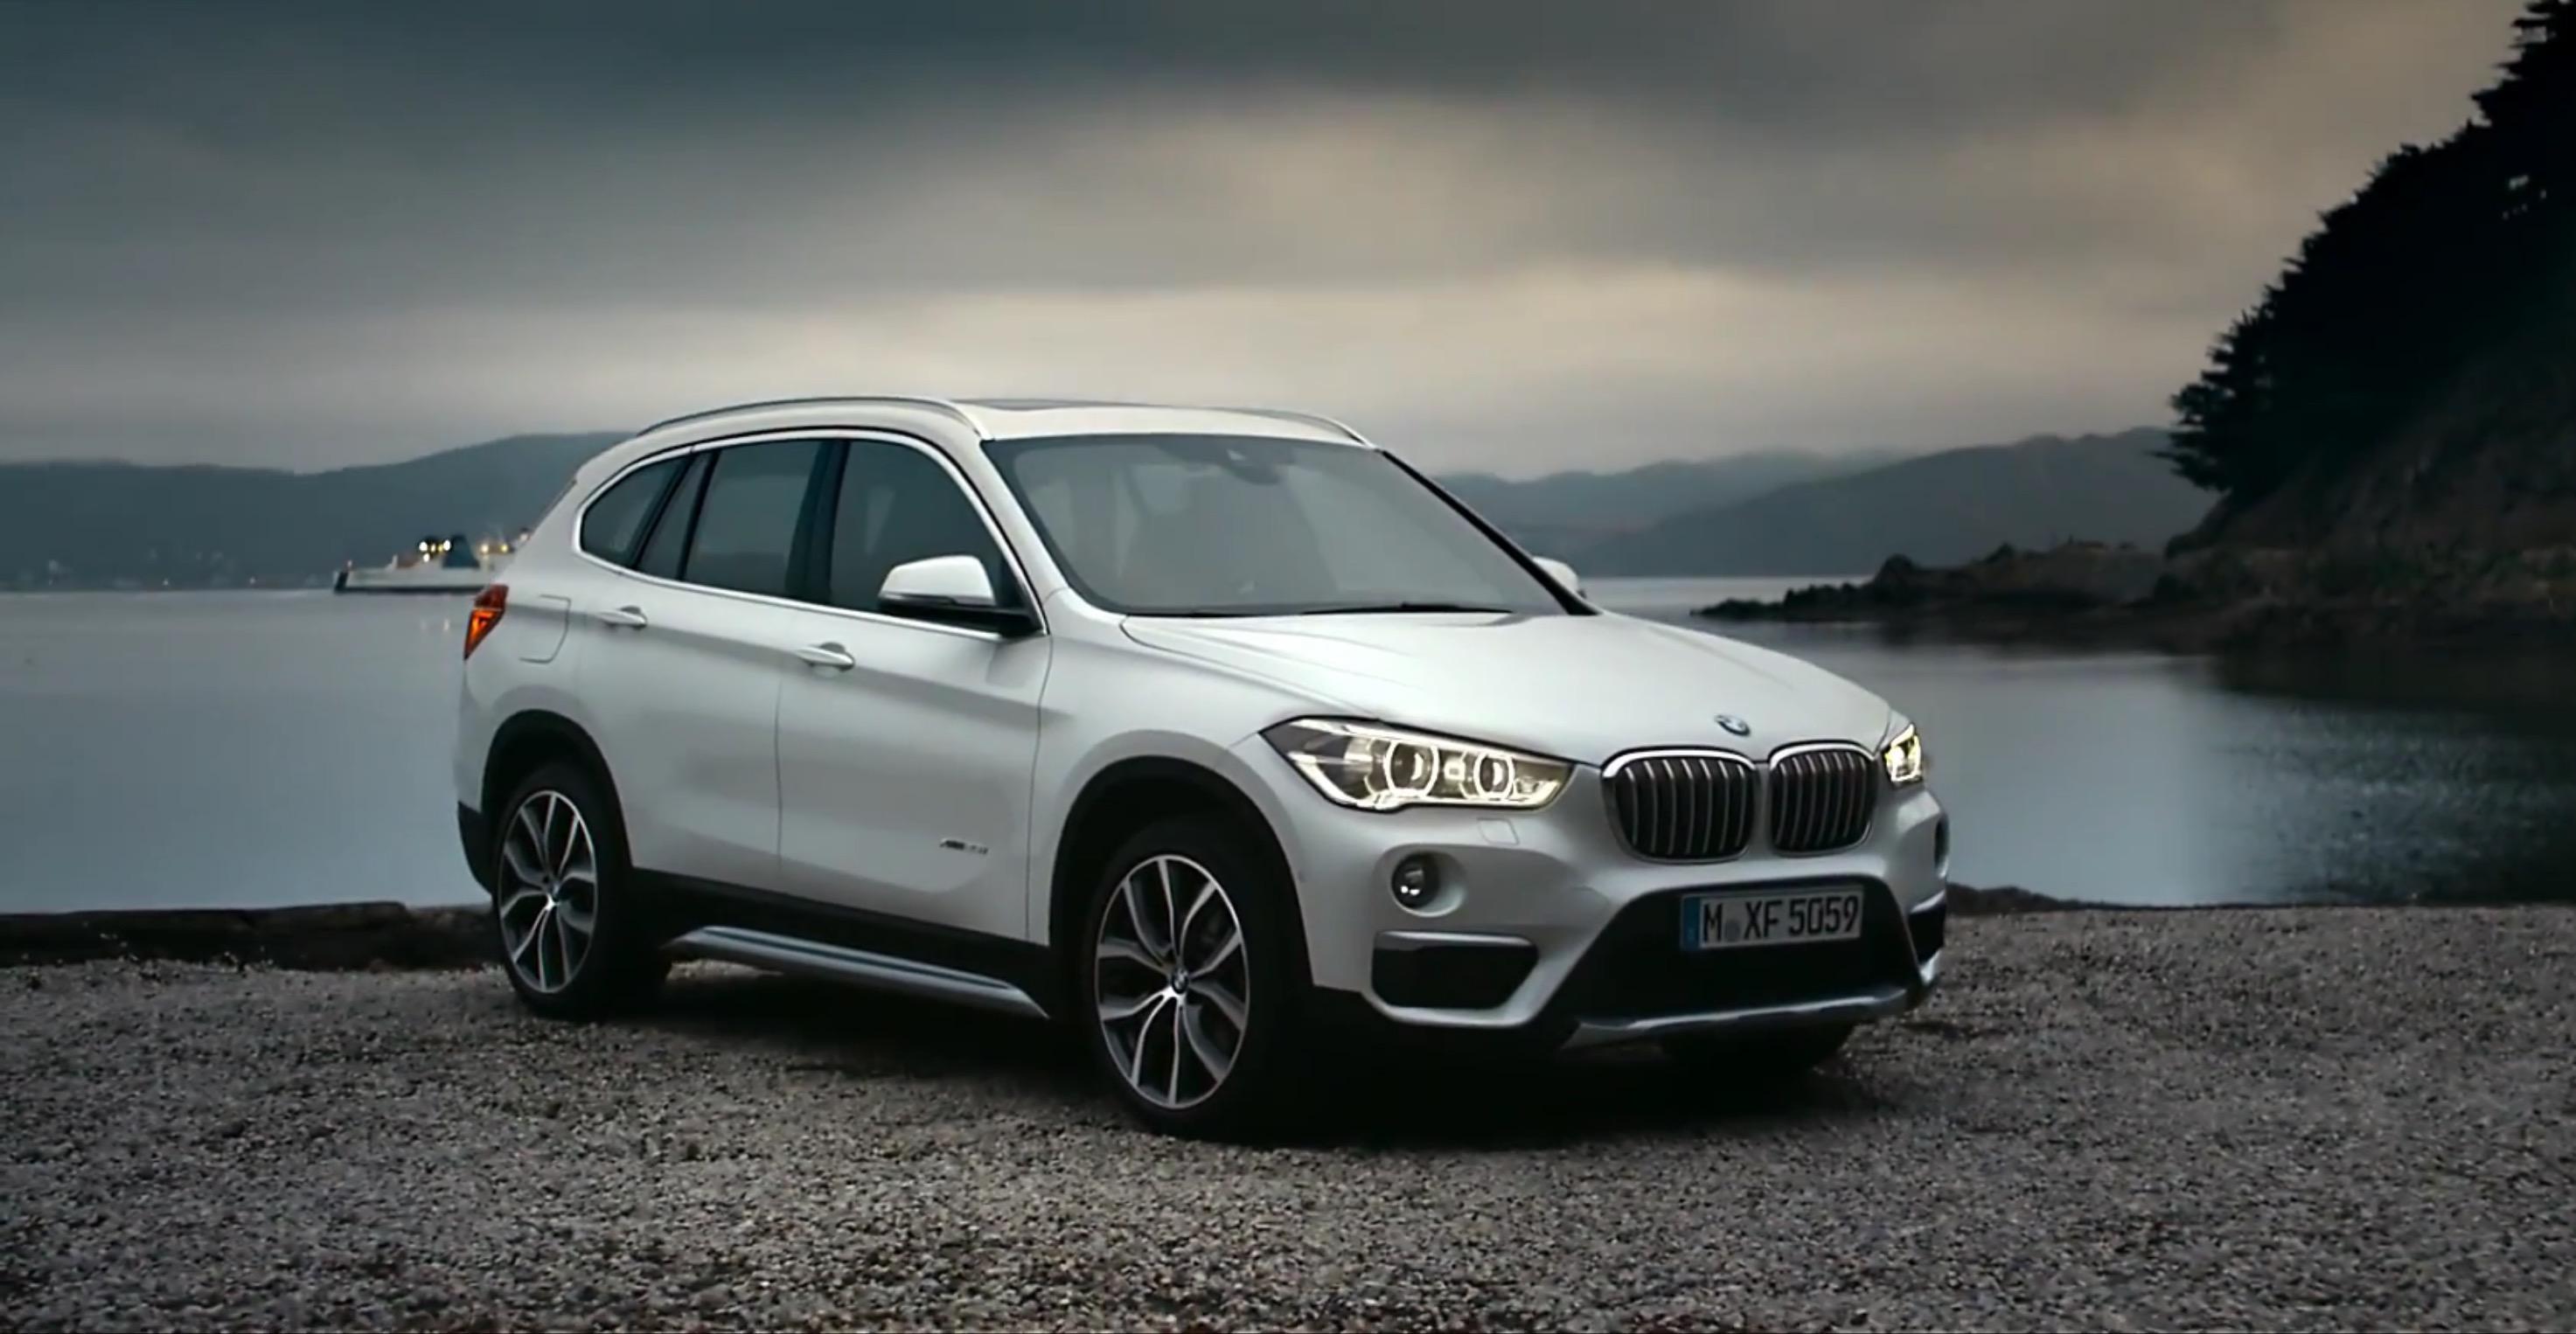 Bmw X1 Wallpaper HD Photo, Wallpaper and other Image